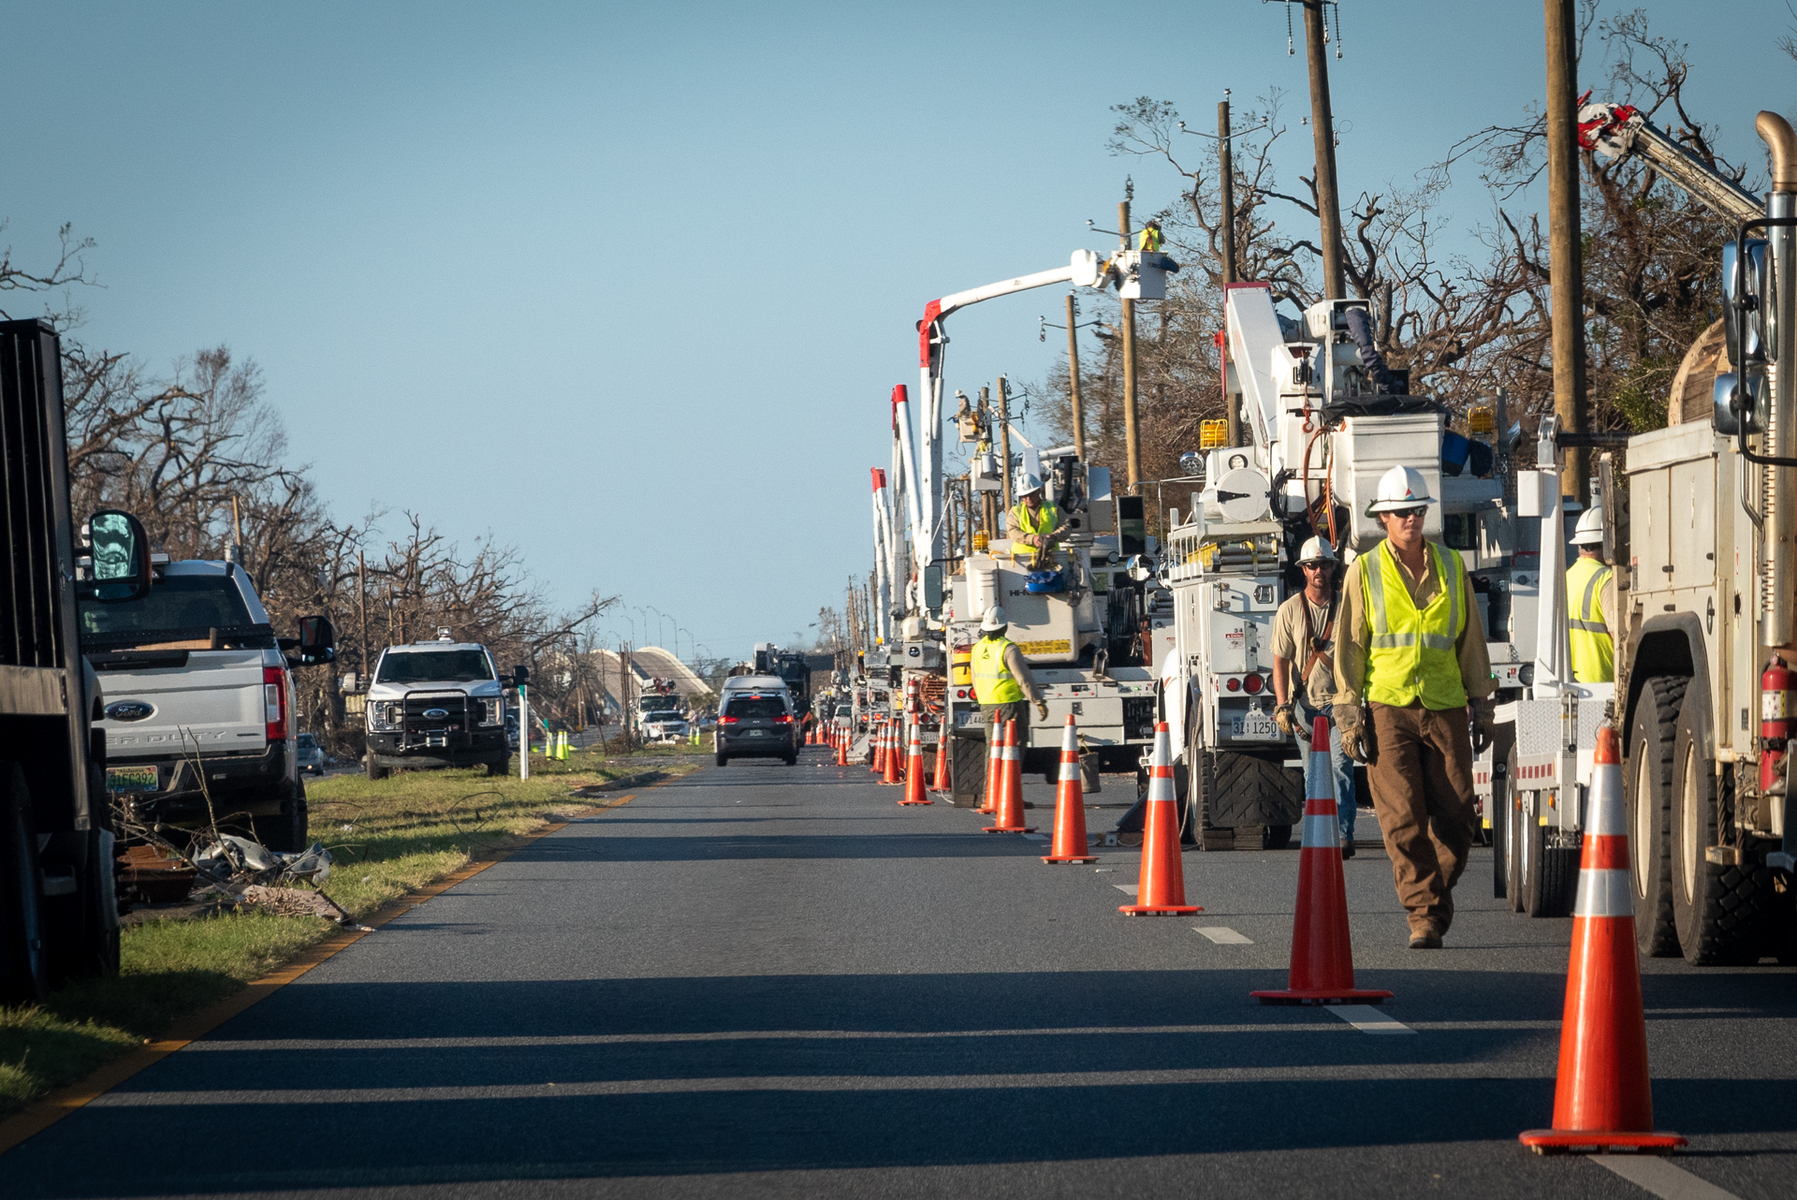 October 18, 2018  - Alabama Power crews begin repairs along Hwy 98 from damages along Hwy 98 from Hurricance Michael. The strongest storm on record to ever make landfall in Northwest Florida, and the fourth most powerful to ever hit the continental United States.